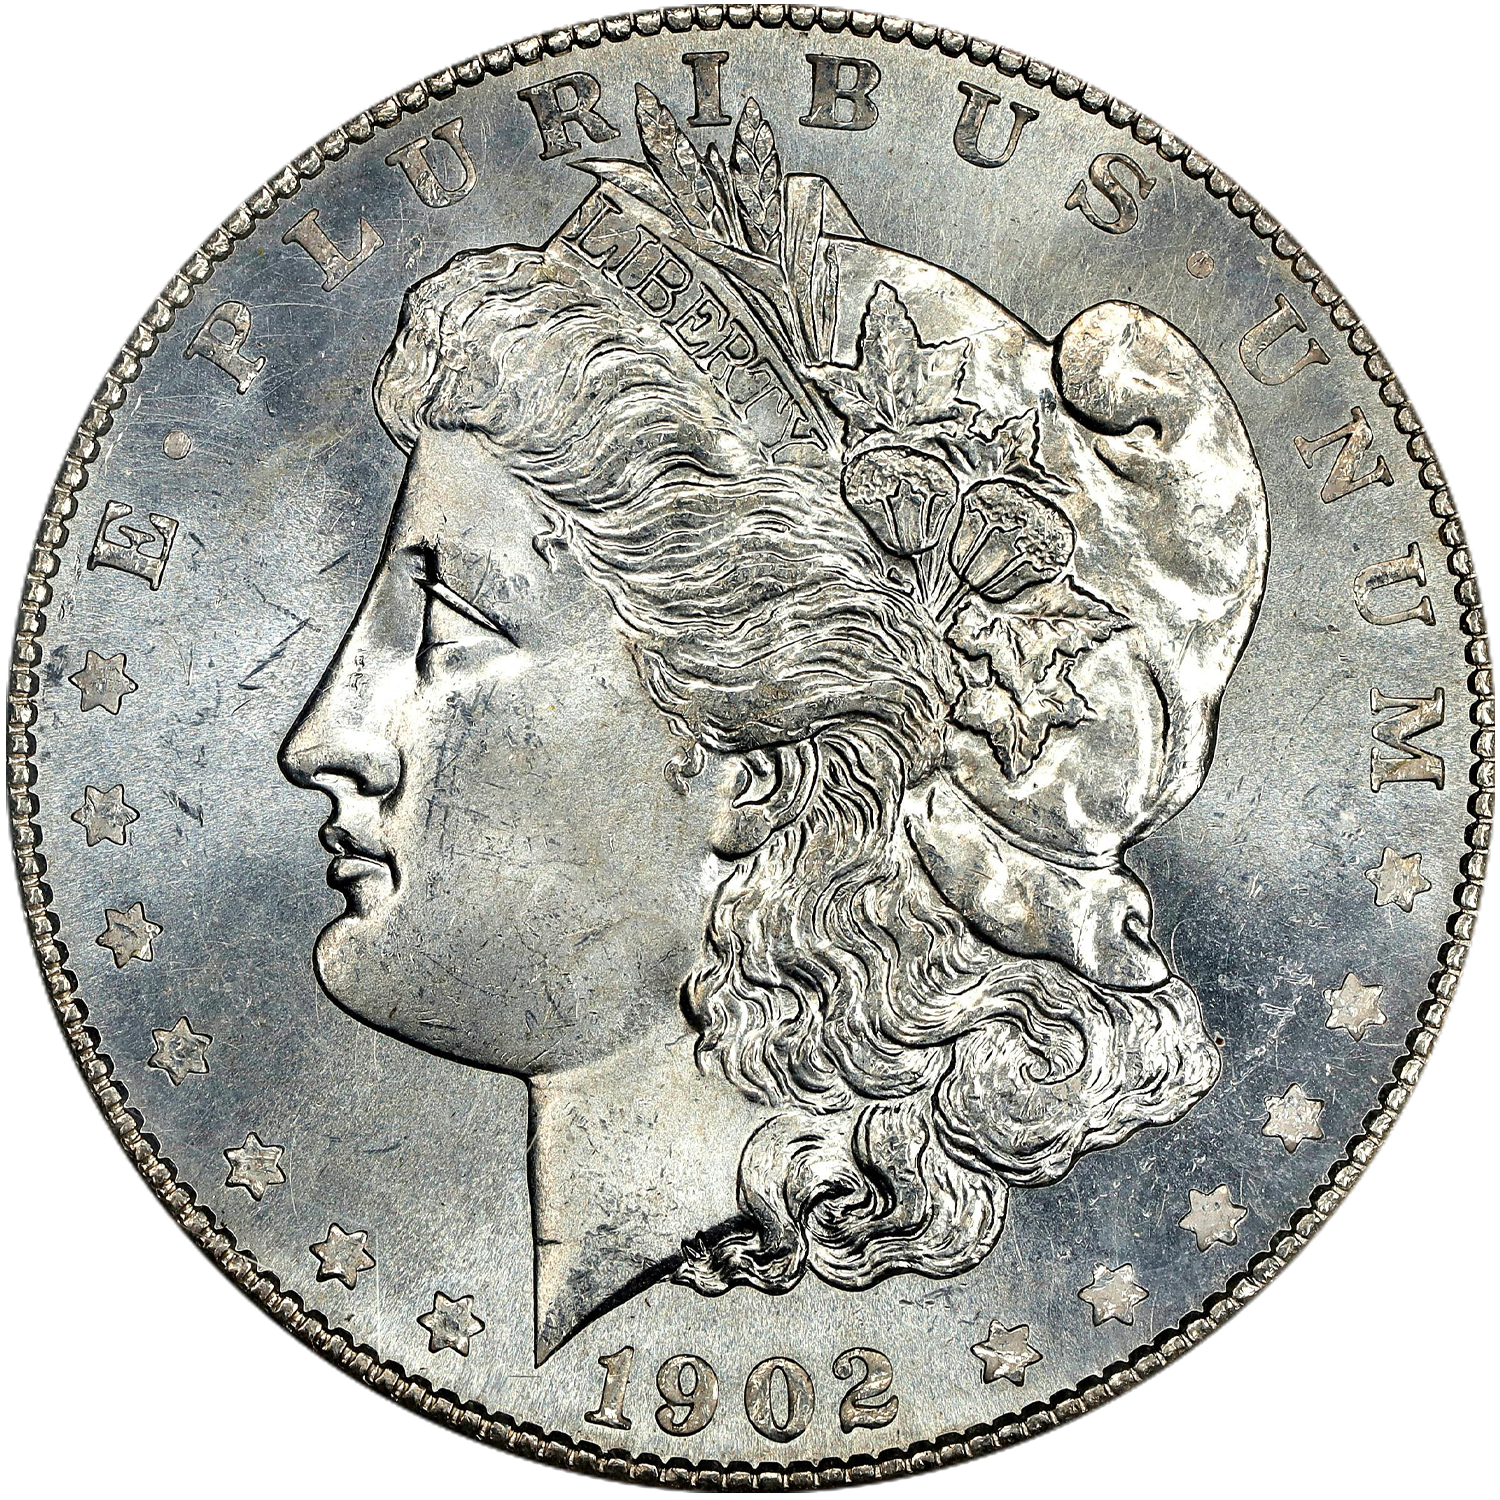 1902 s mint morgan dollar price guide value